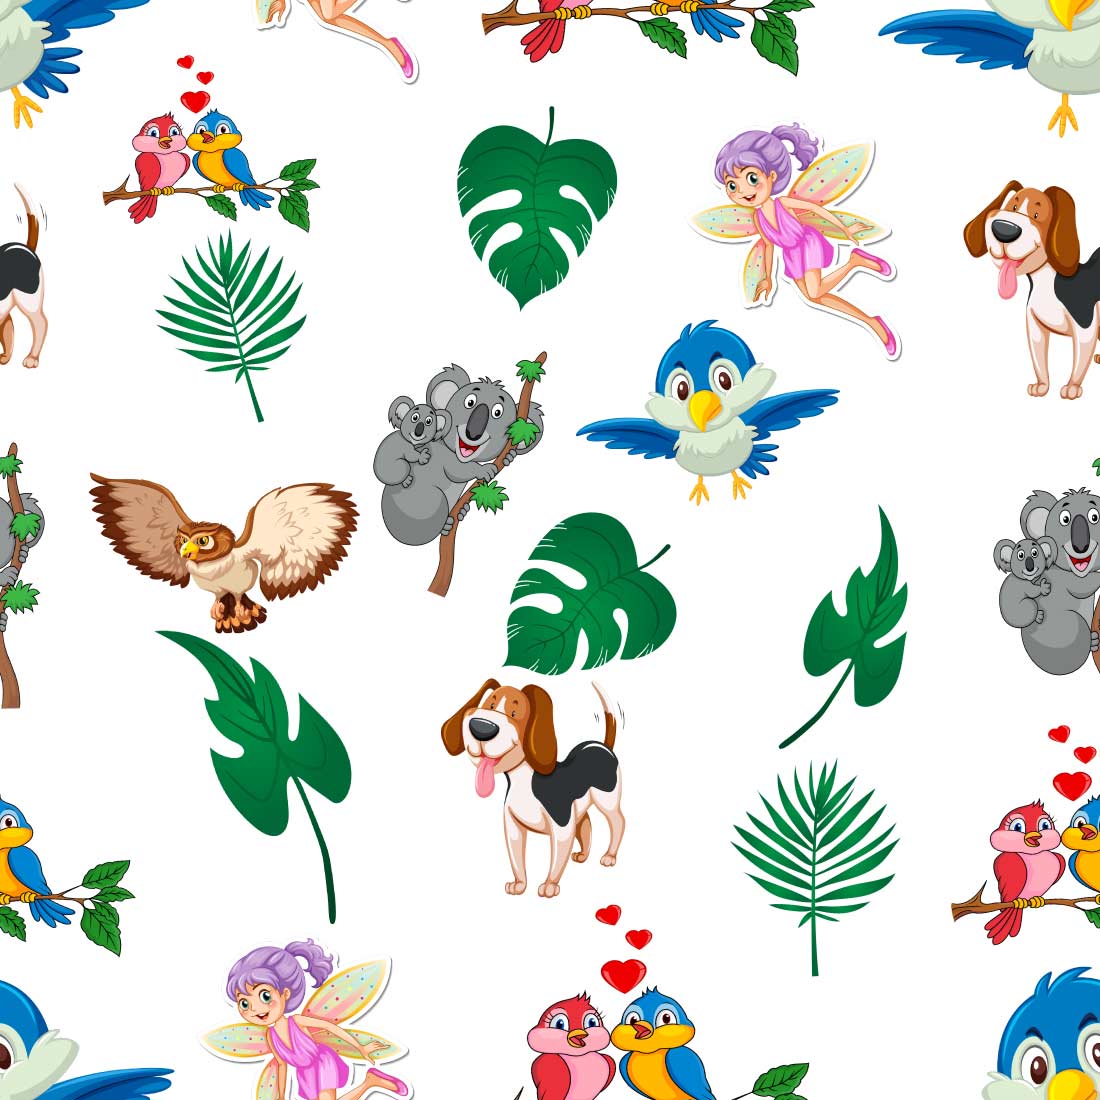 Pattern Design with Birds and Bare cover image.